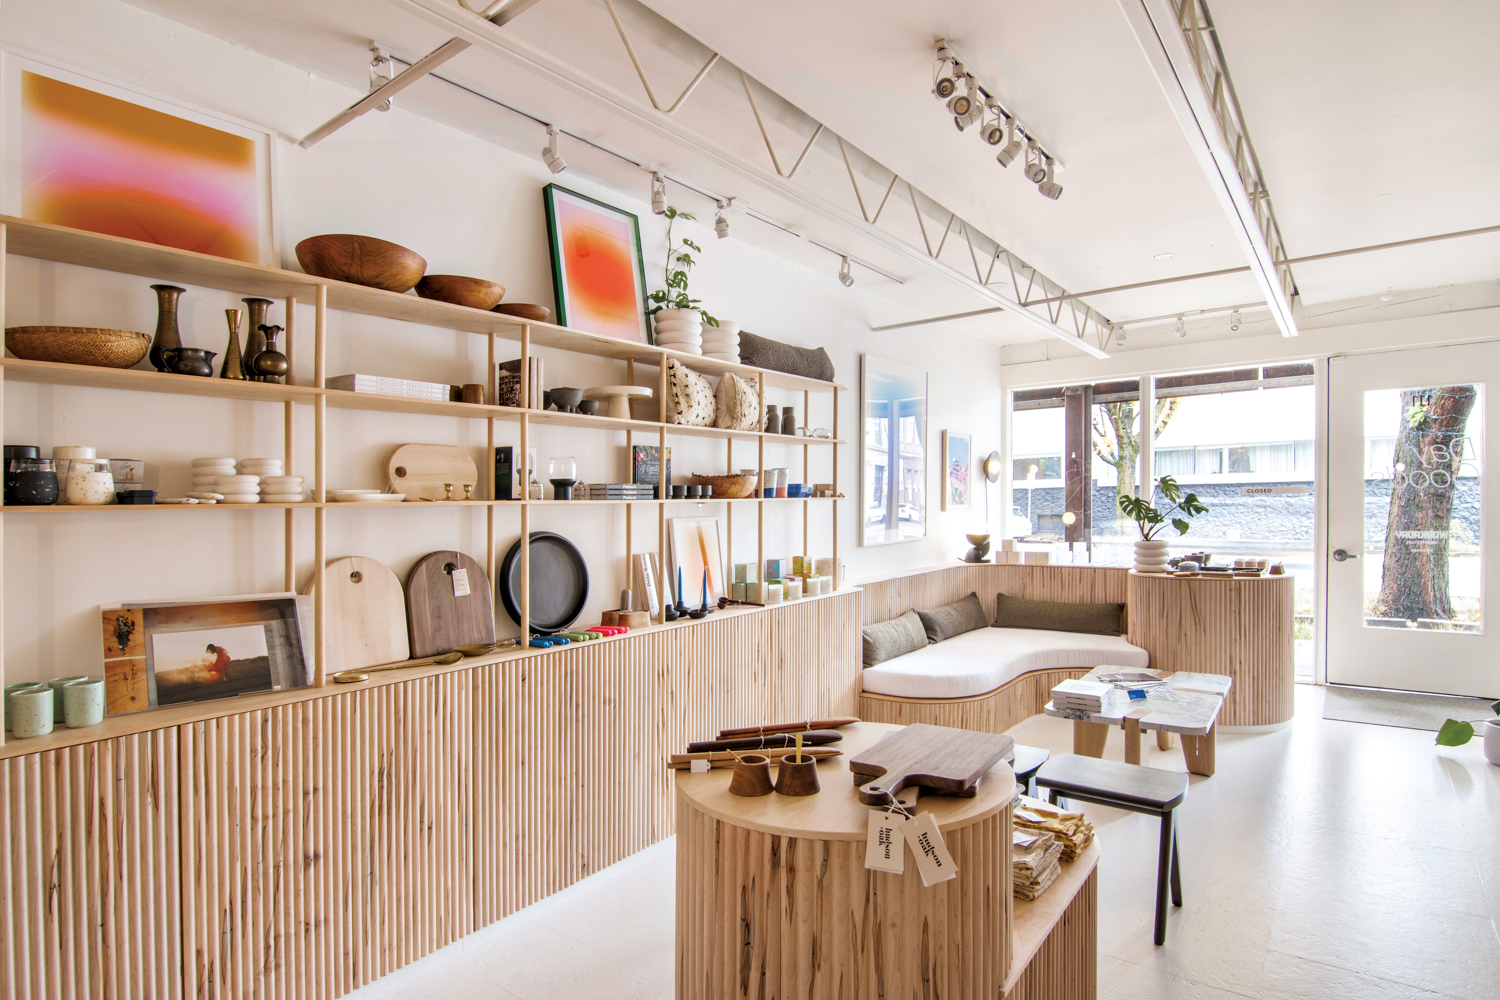 Store with fluted wood cabinets and tables showcasing home goods like cutting boards and dishware.